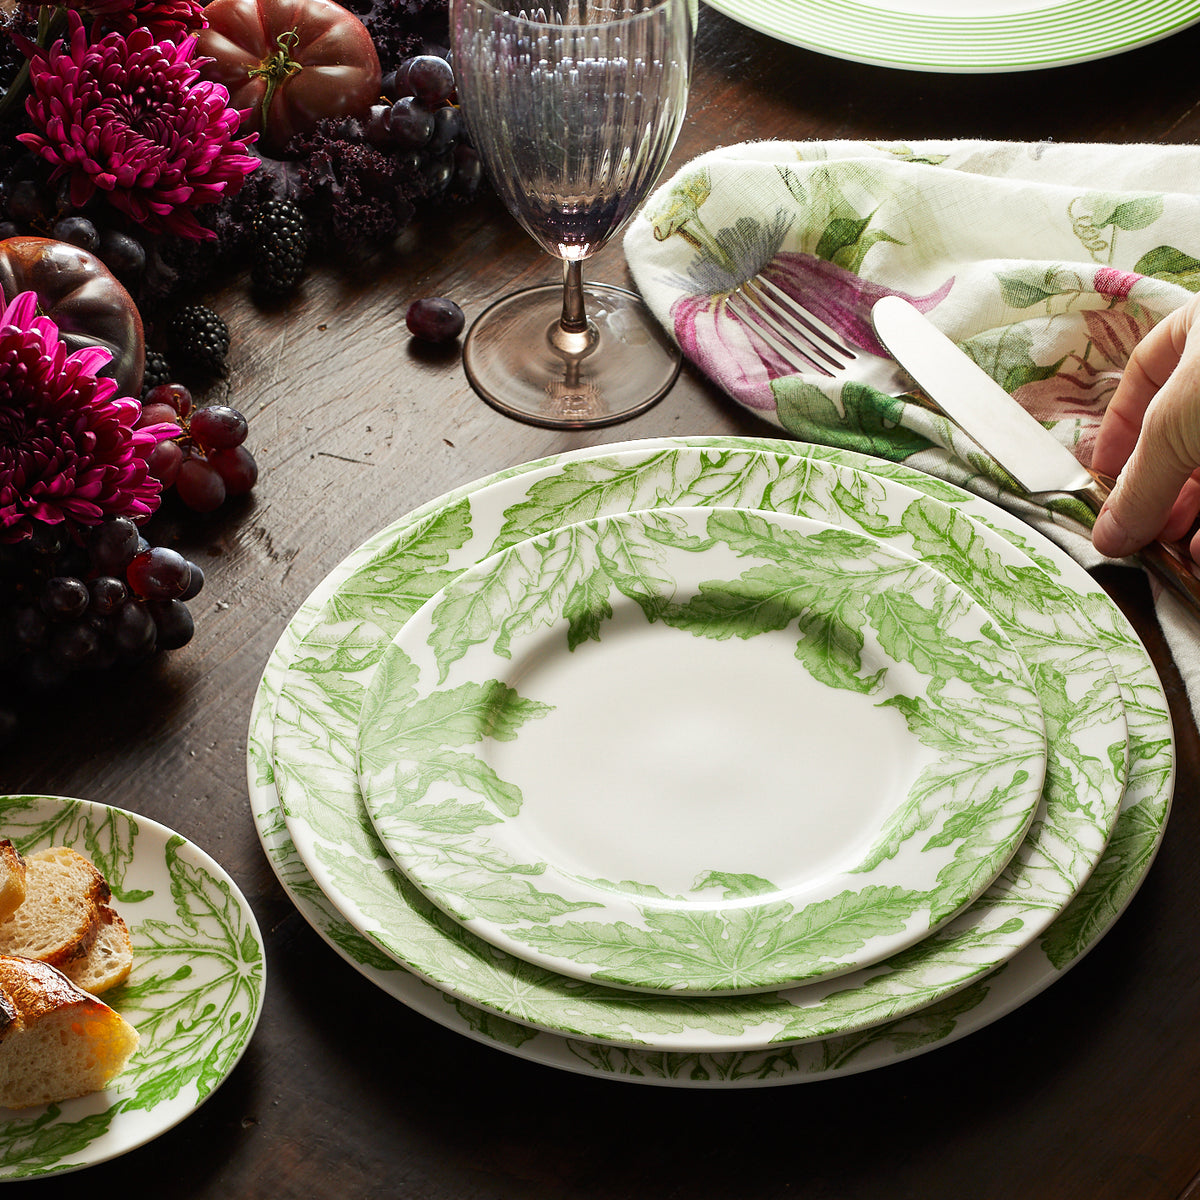 A table setting features green and white leaf-patterned plates, a wine glass, bread, and a floral napkin. A hand places a knife beside the Caskata Artisanal Home Freya Rimmed Charger Plate. Purple flowers and grapes are in the background, evoking an atmosphere worthy of the goddess of love.